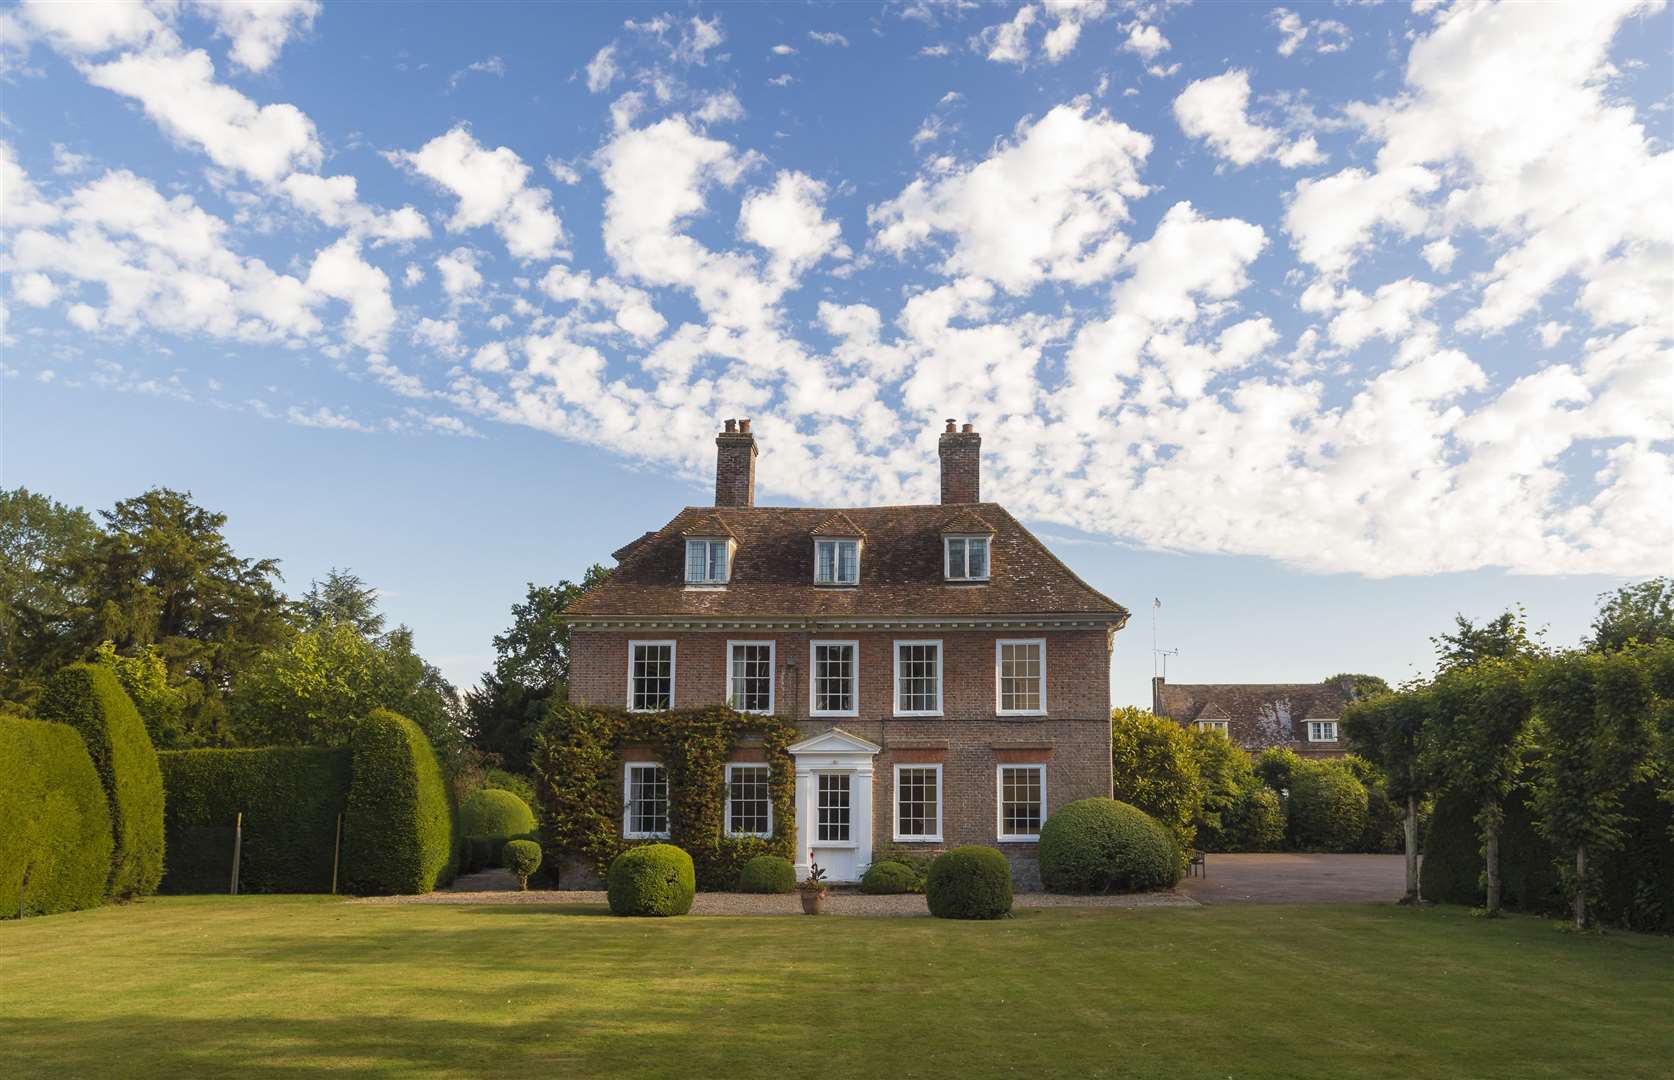 The massive 17th Century Stone Green Hall is on the market for £2.85 million